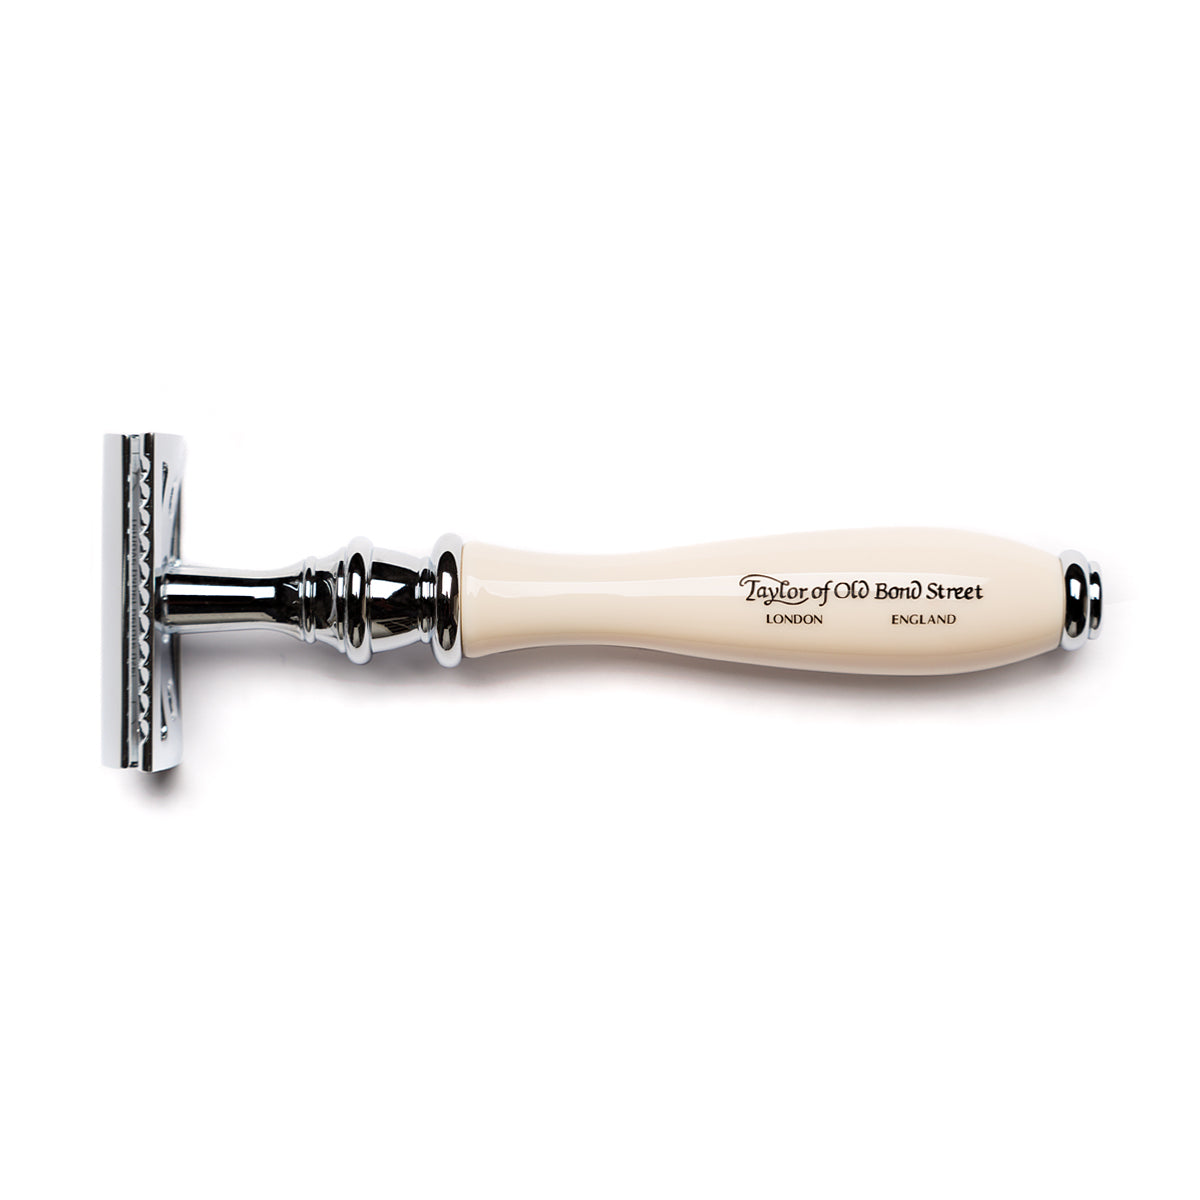 Taylor of Old Bond Street Victorian Safety Razor with Imitation Ivory Handle